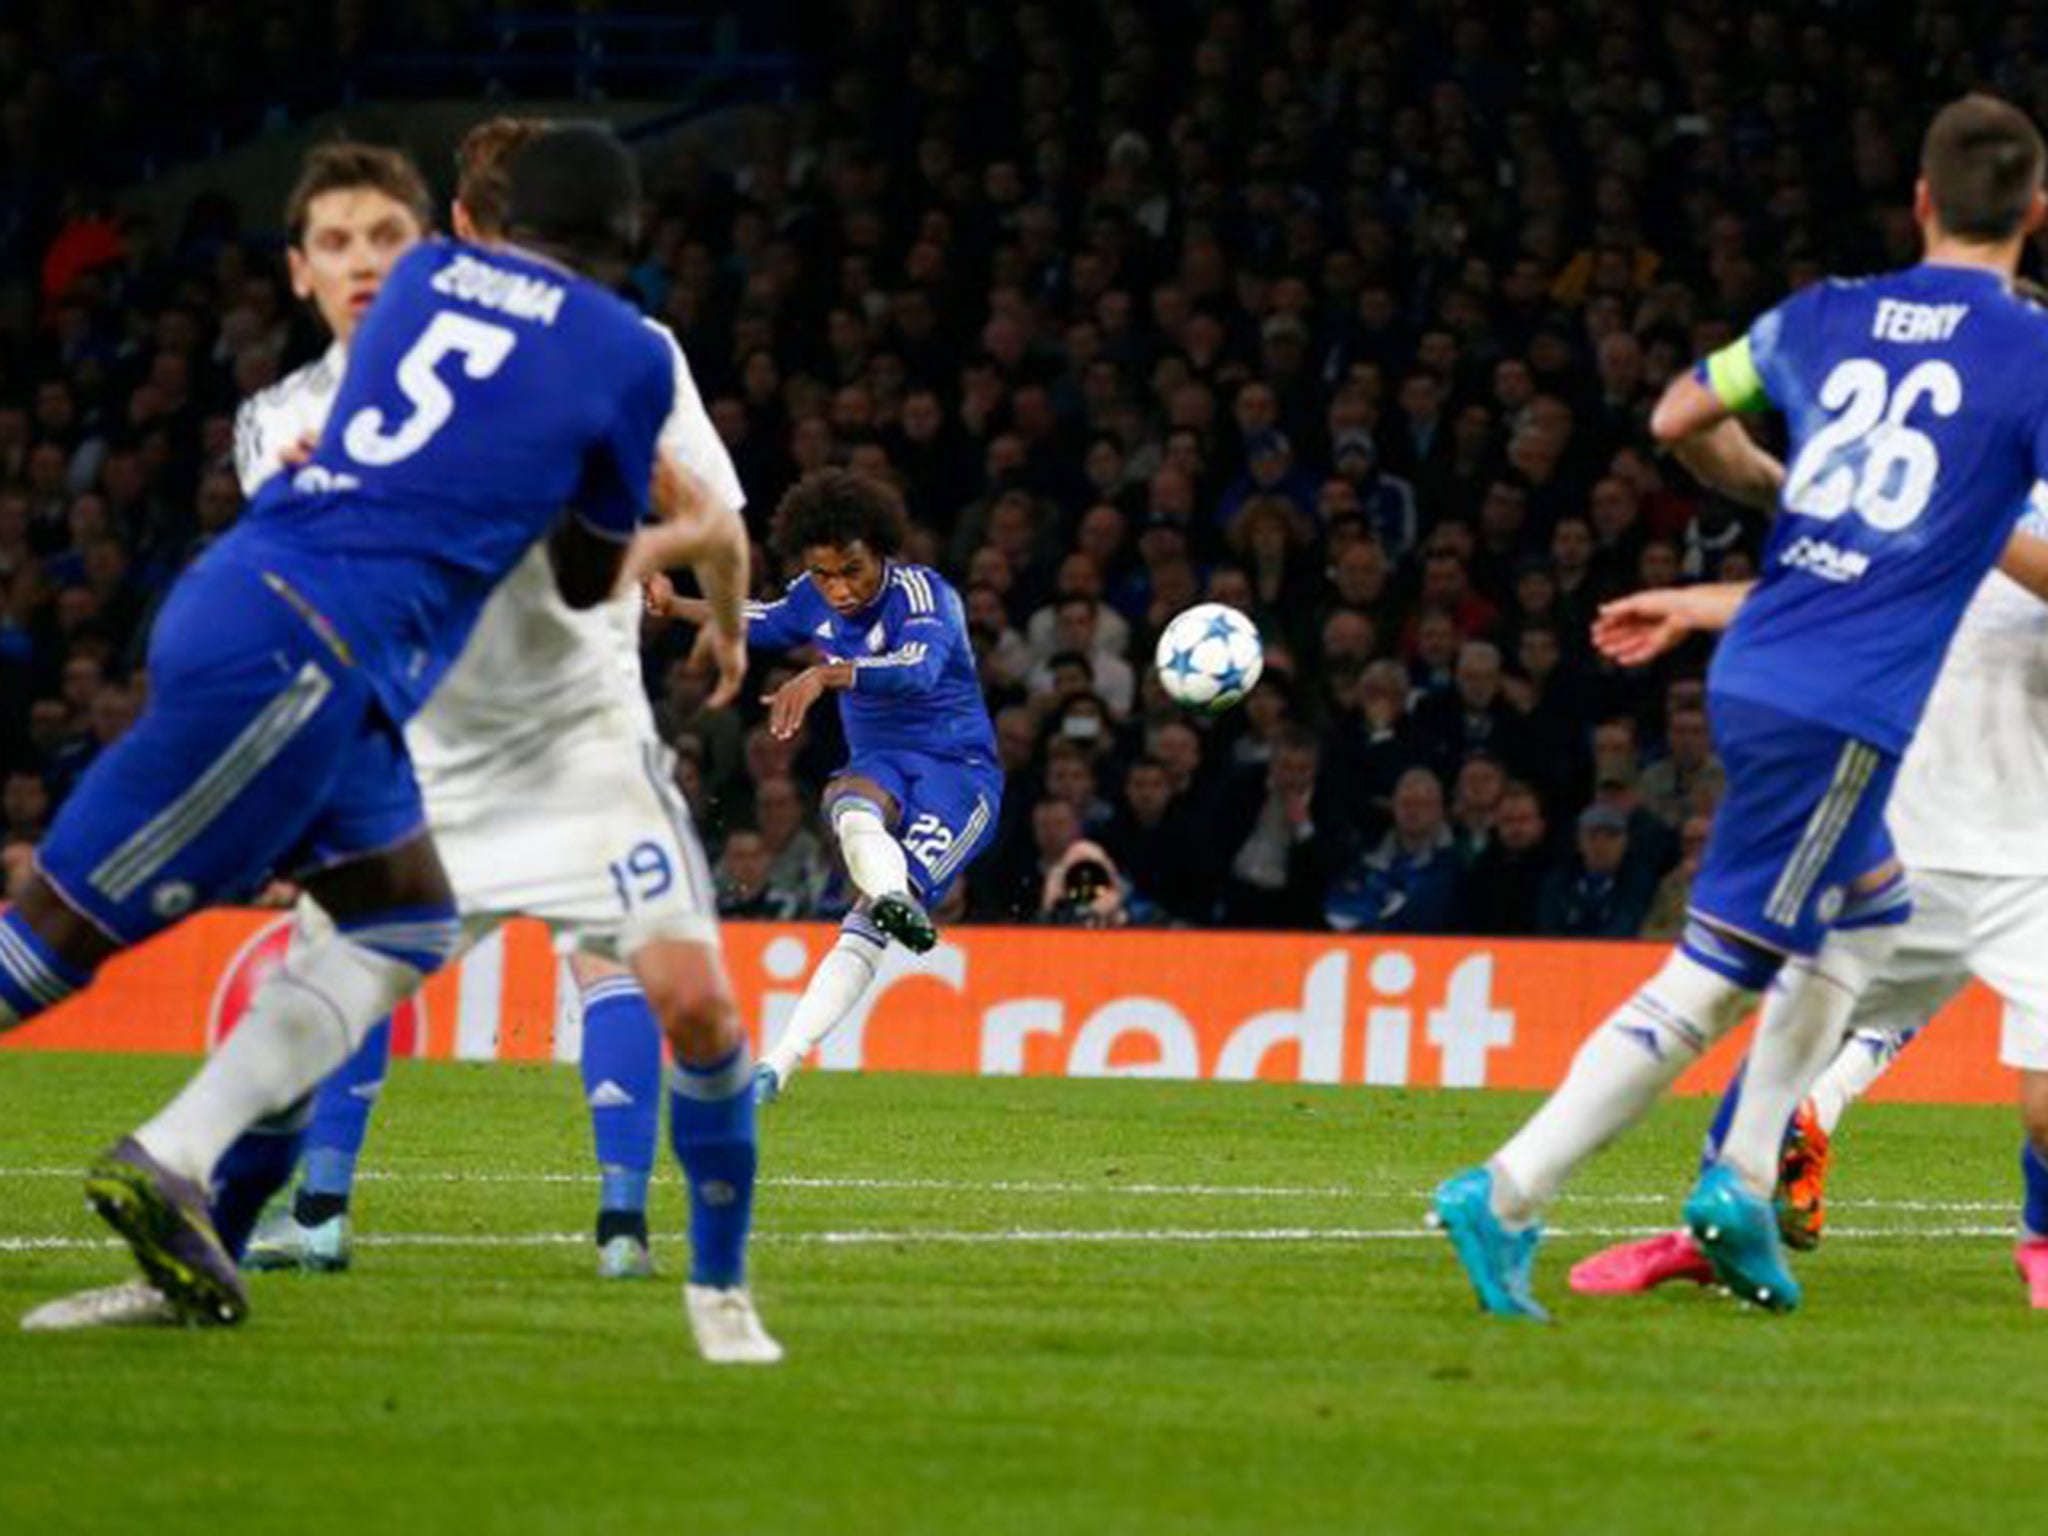 &#13;
Willian scored a superb free-kick to win the game for Chelsea&#13;